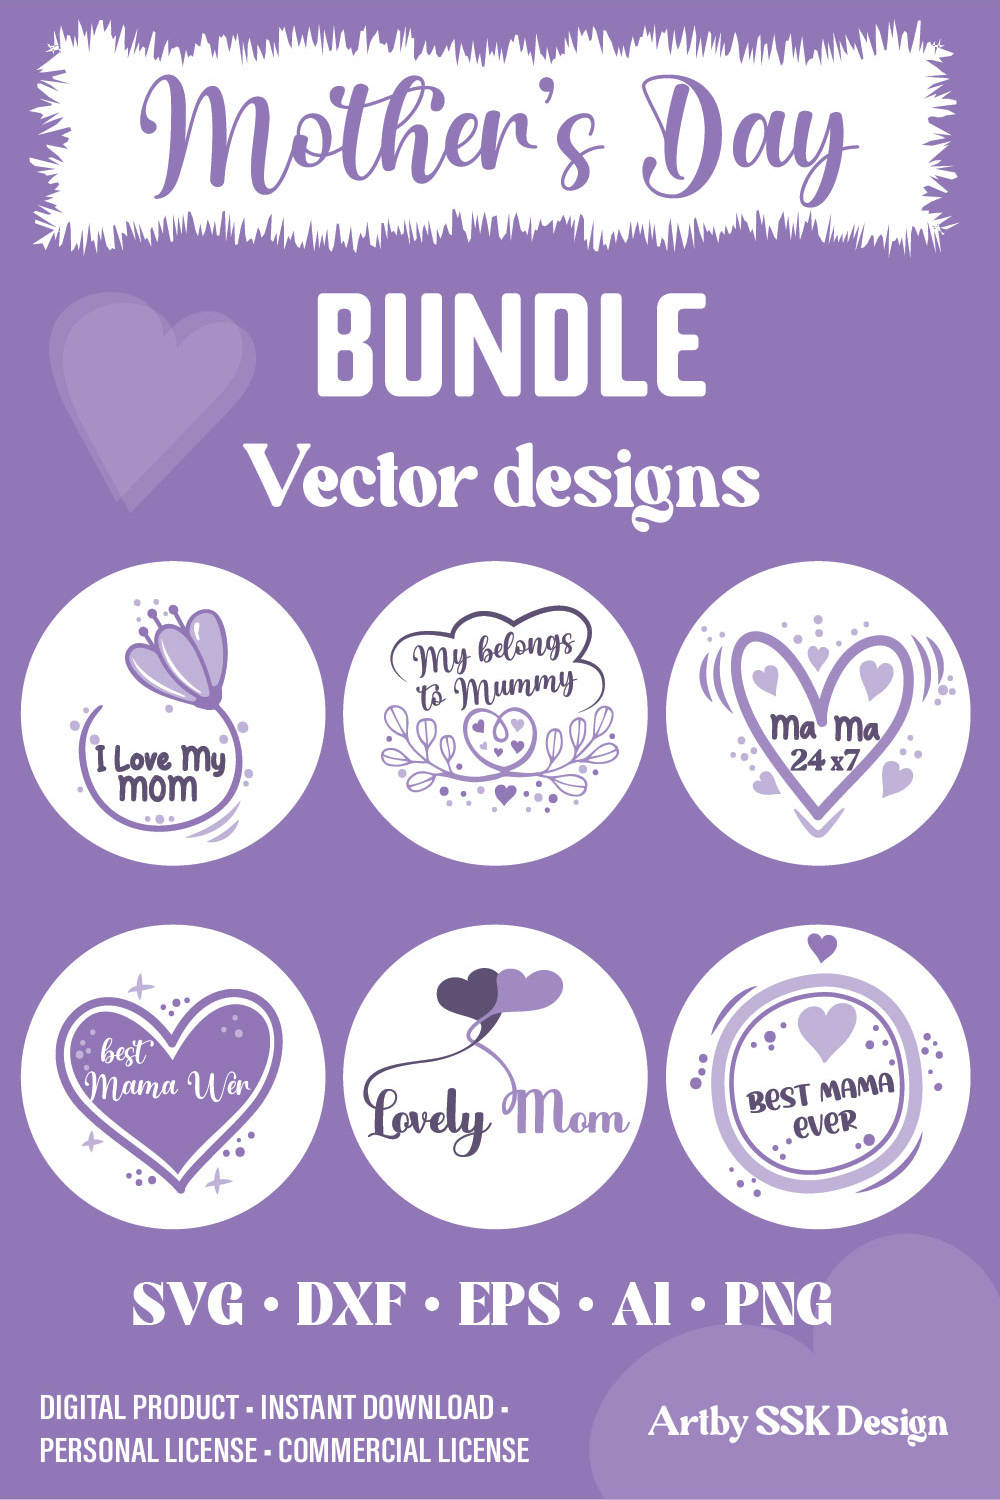 Happy Mother's Day SVG, Mothers Day SVG Bundle Instant Download Full vectors 100% Editable and Scalable CMYK colors Print ready pinterest preview image.